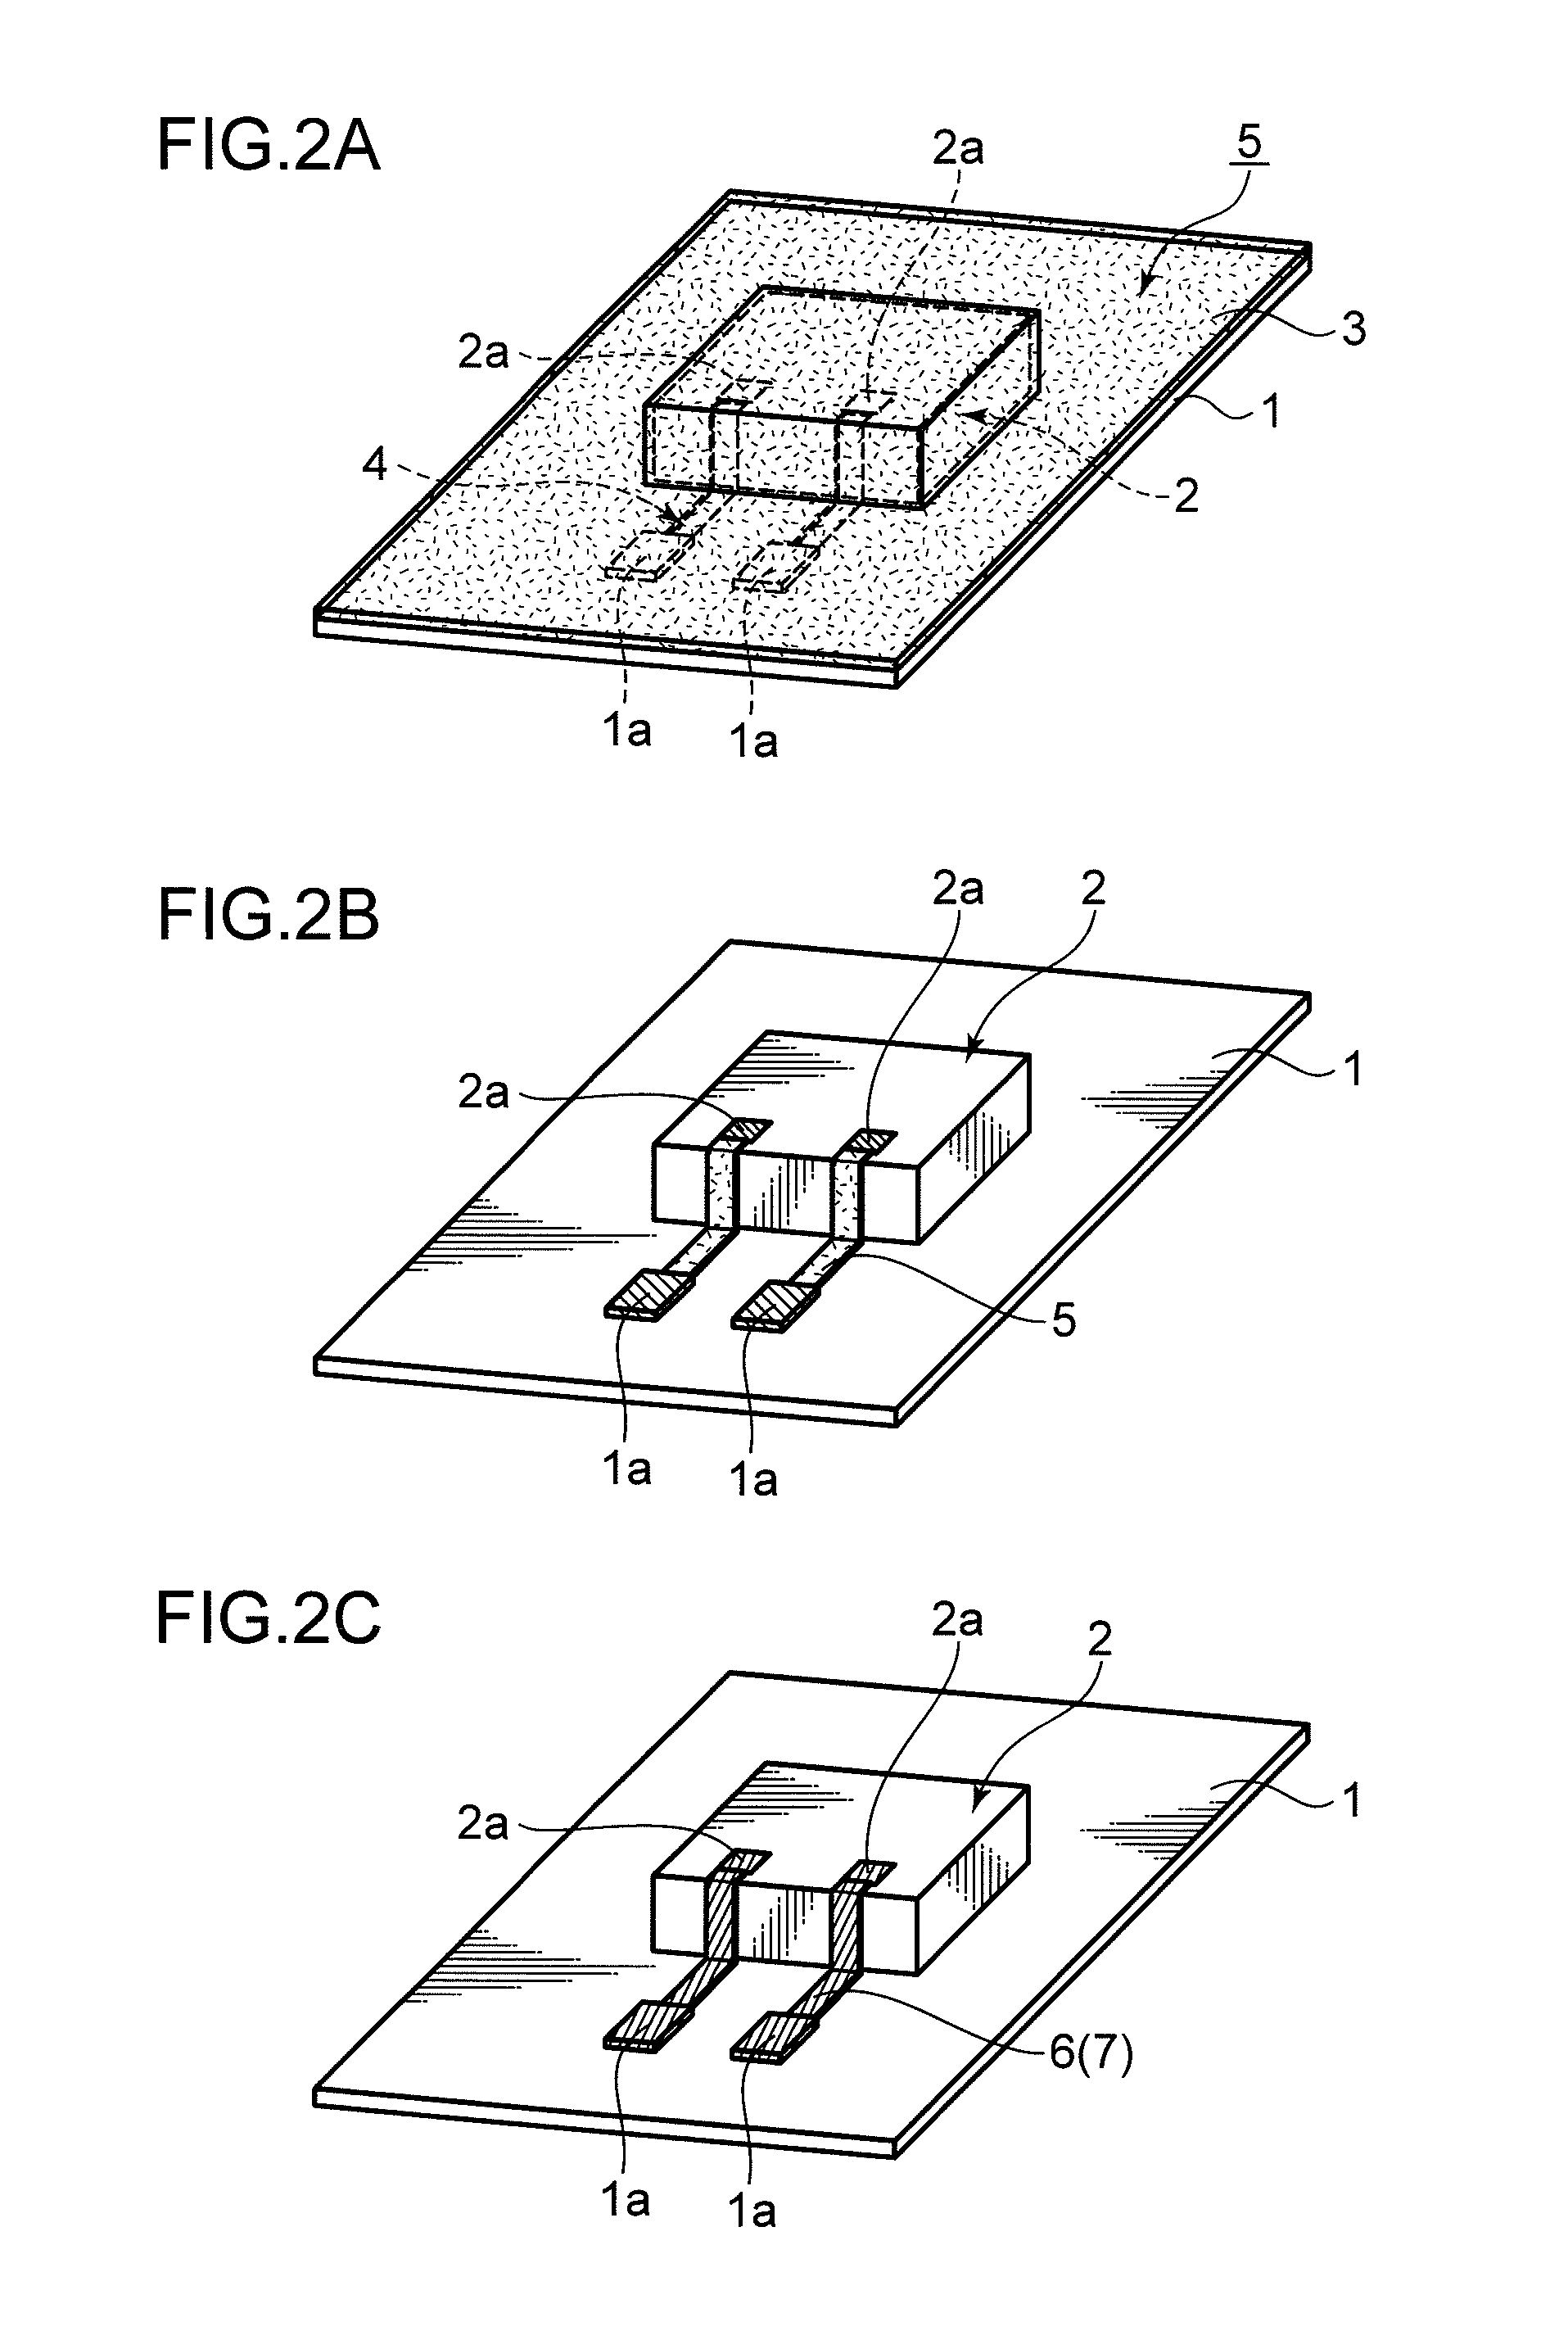 Method of mounting semiconductor chips, semiconductor device obtained using the method, method of connecting semiconductor chips, three-dimensional structure in which wiring is provided on its surface, and method of producing the same